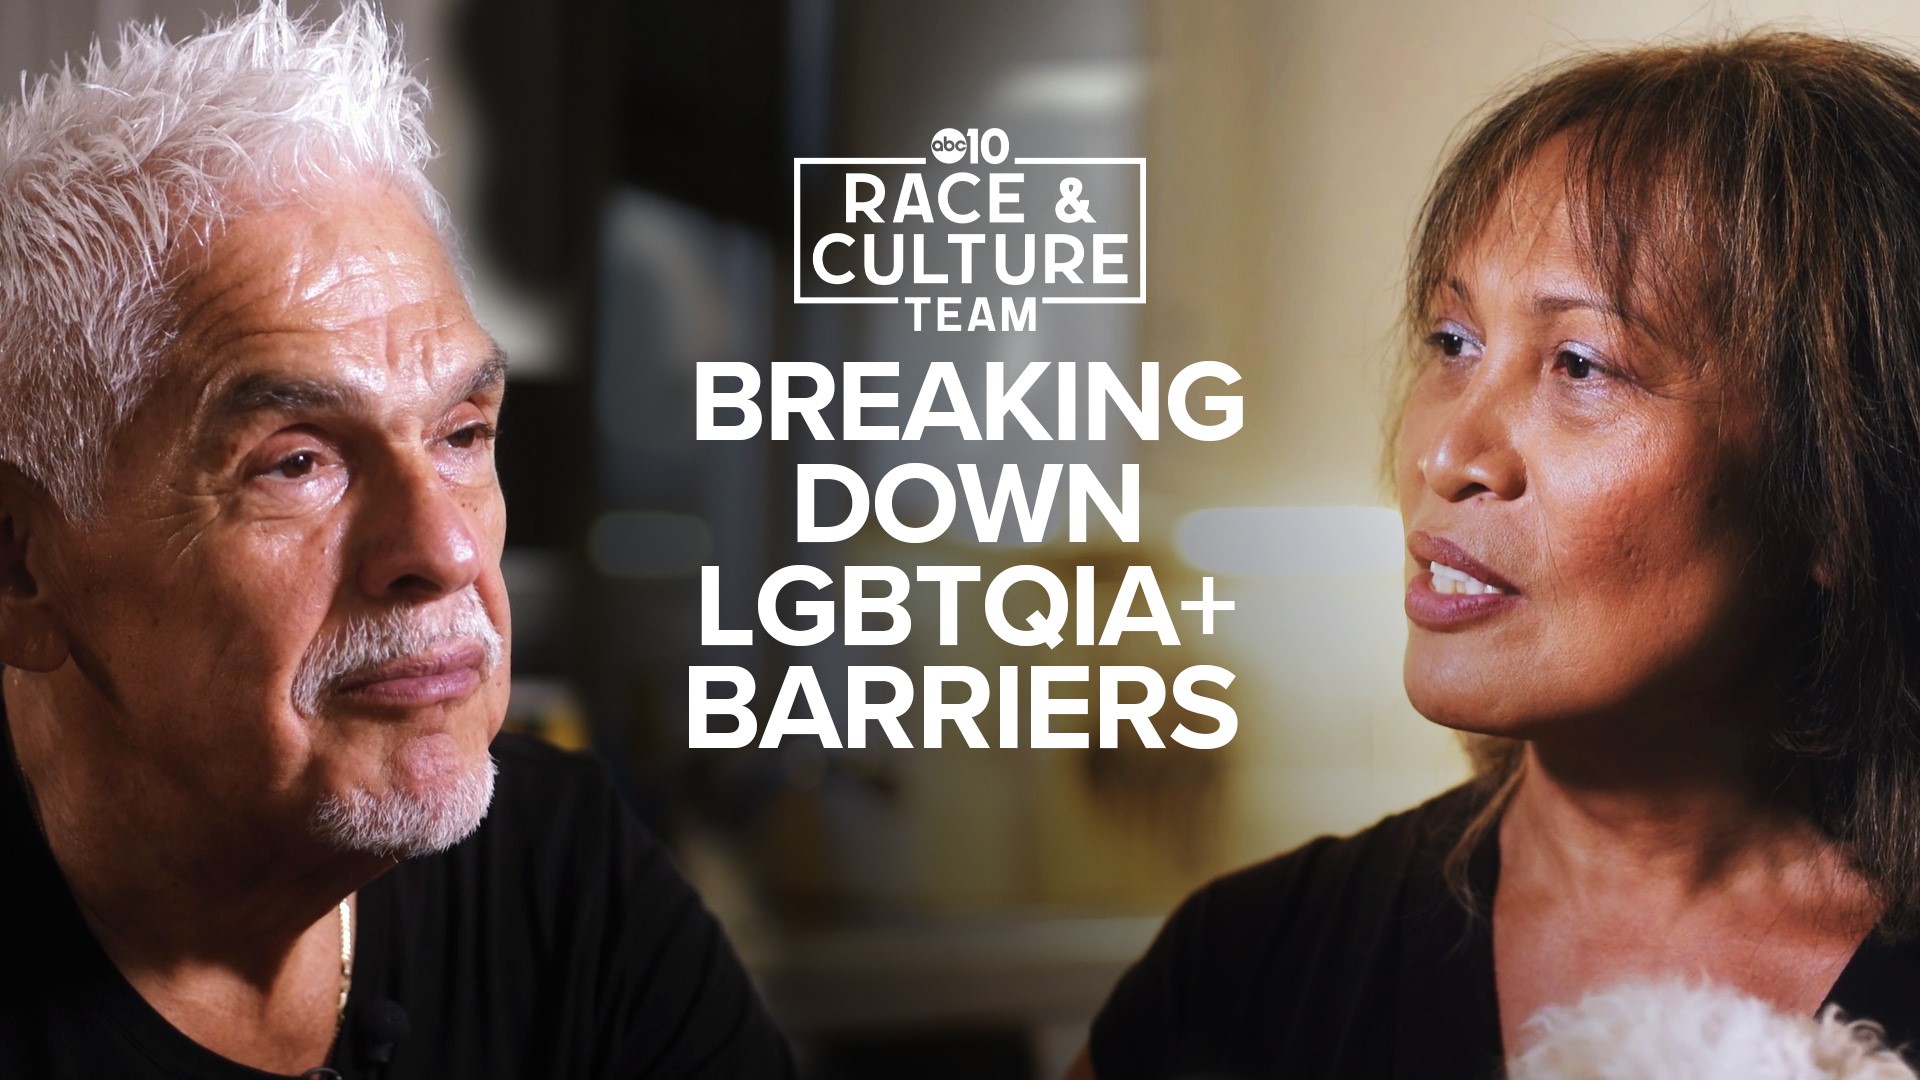 Two members of Sacramento's LGBTQI+ community share their stories of how things have transformed since the '60s and '70s. An ABC10 Race & Culture Team story.